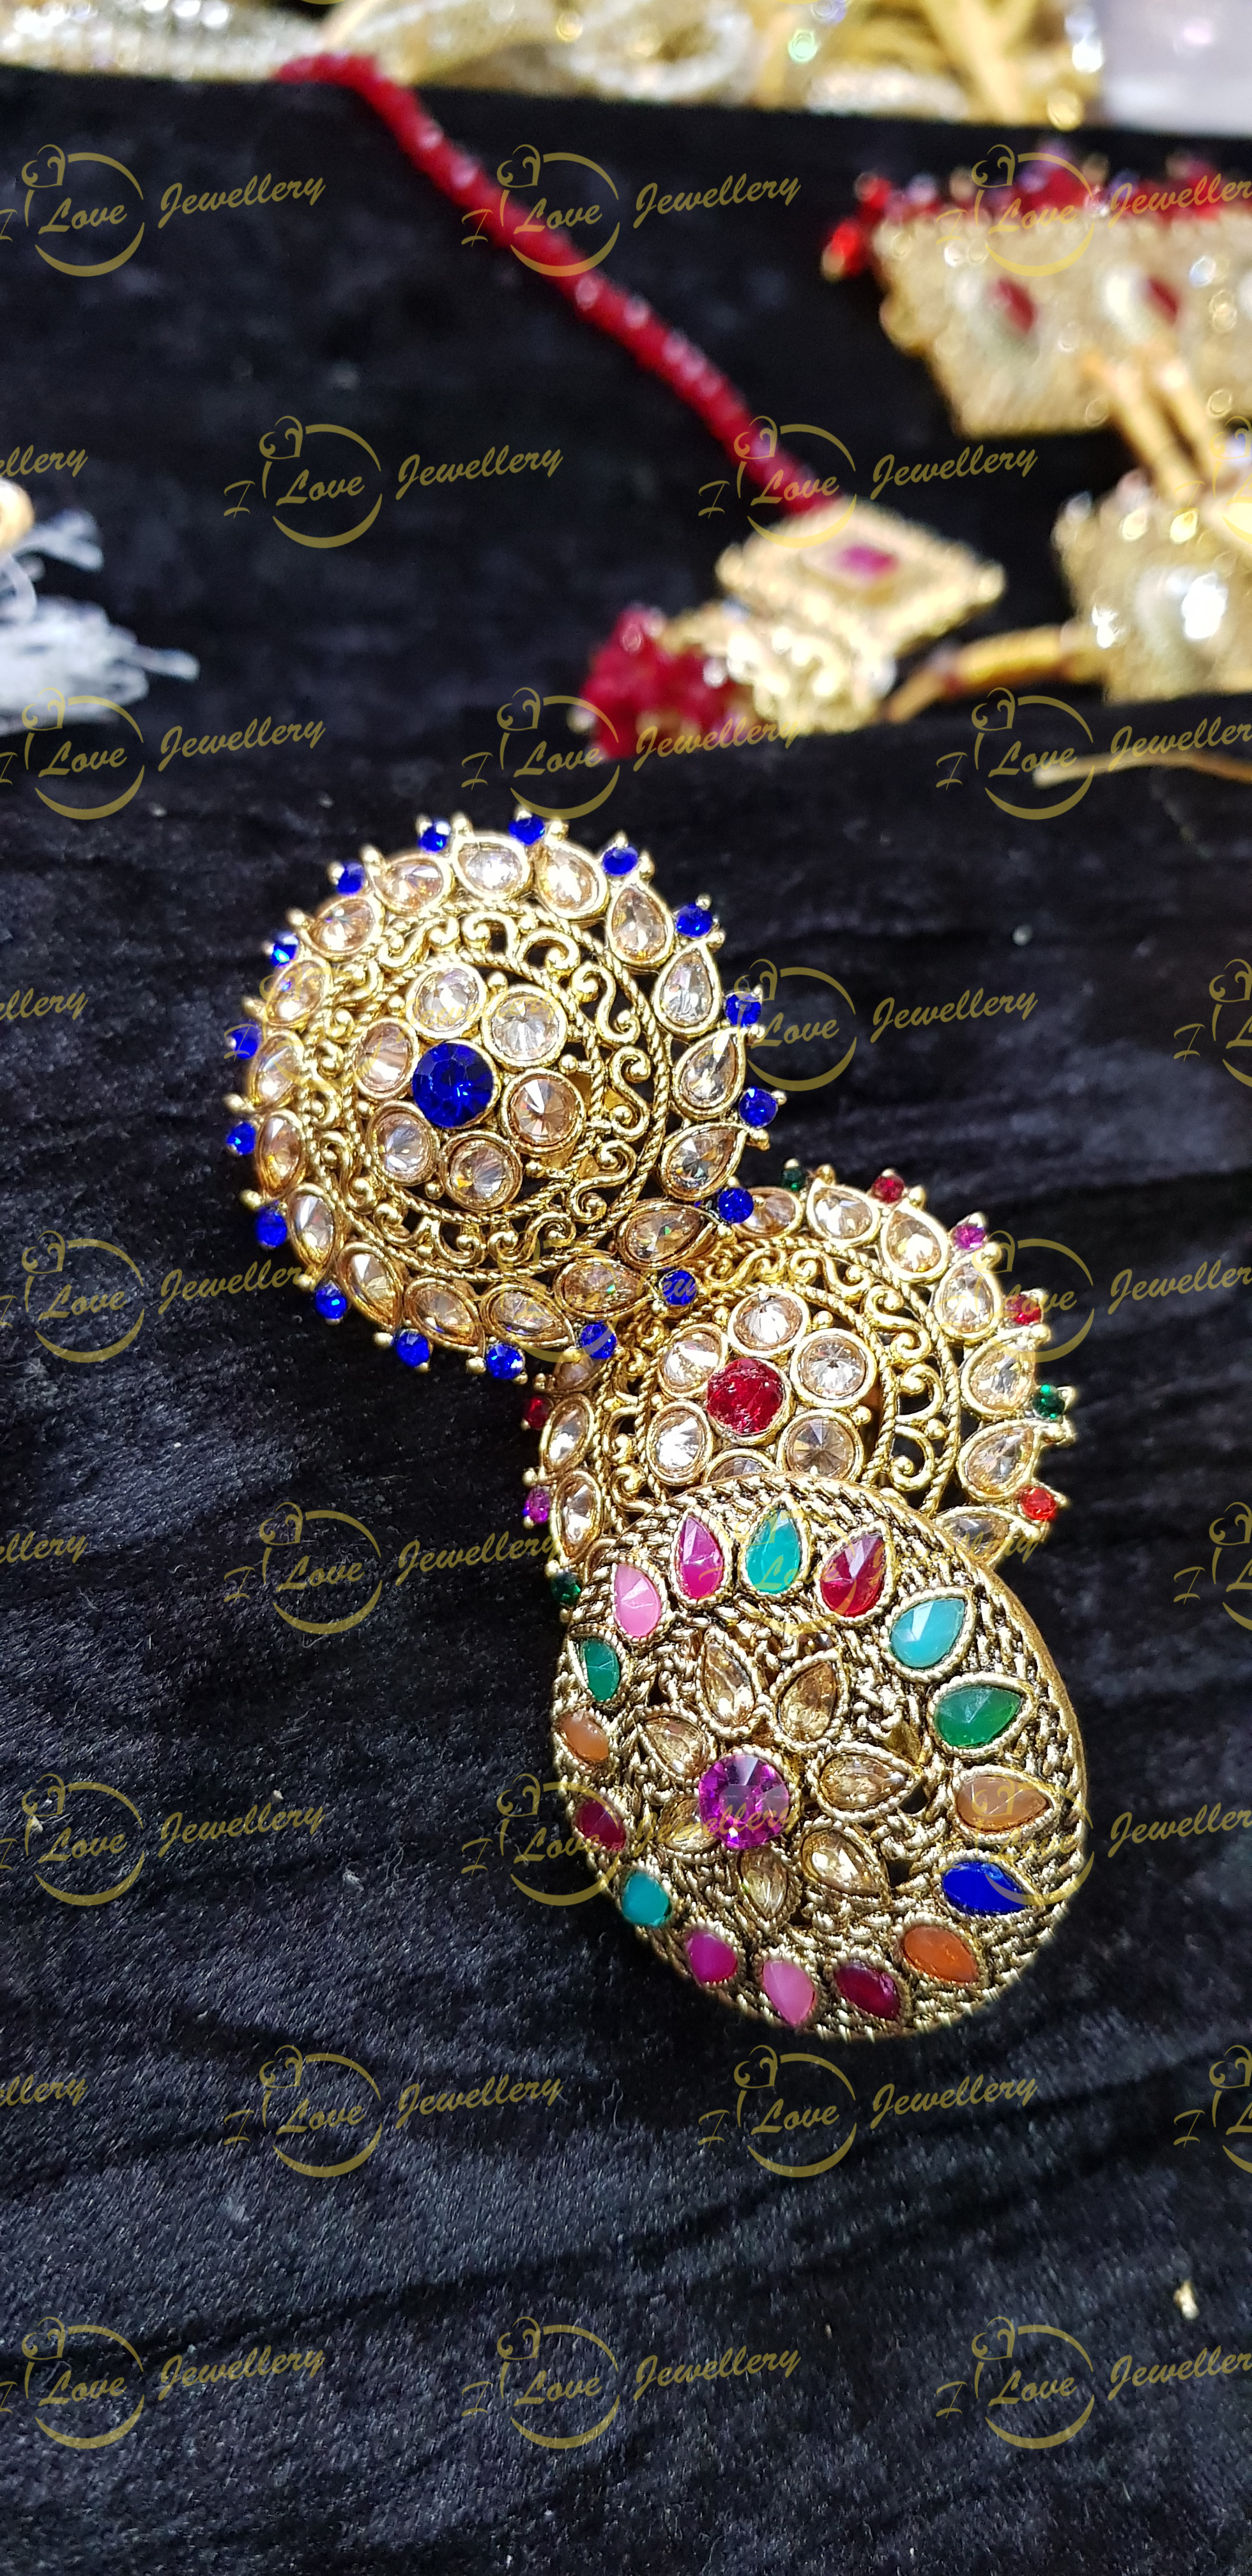 Indian Pakistani rings collection - Fashion rings - casual rings - bridal rings - wholesale Pakistani jewellery - bespoke Pakistani jewellery